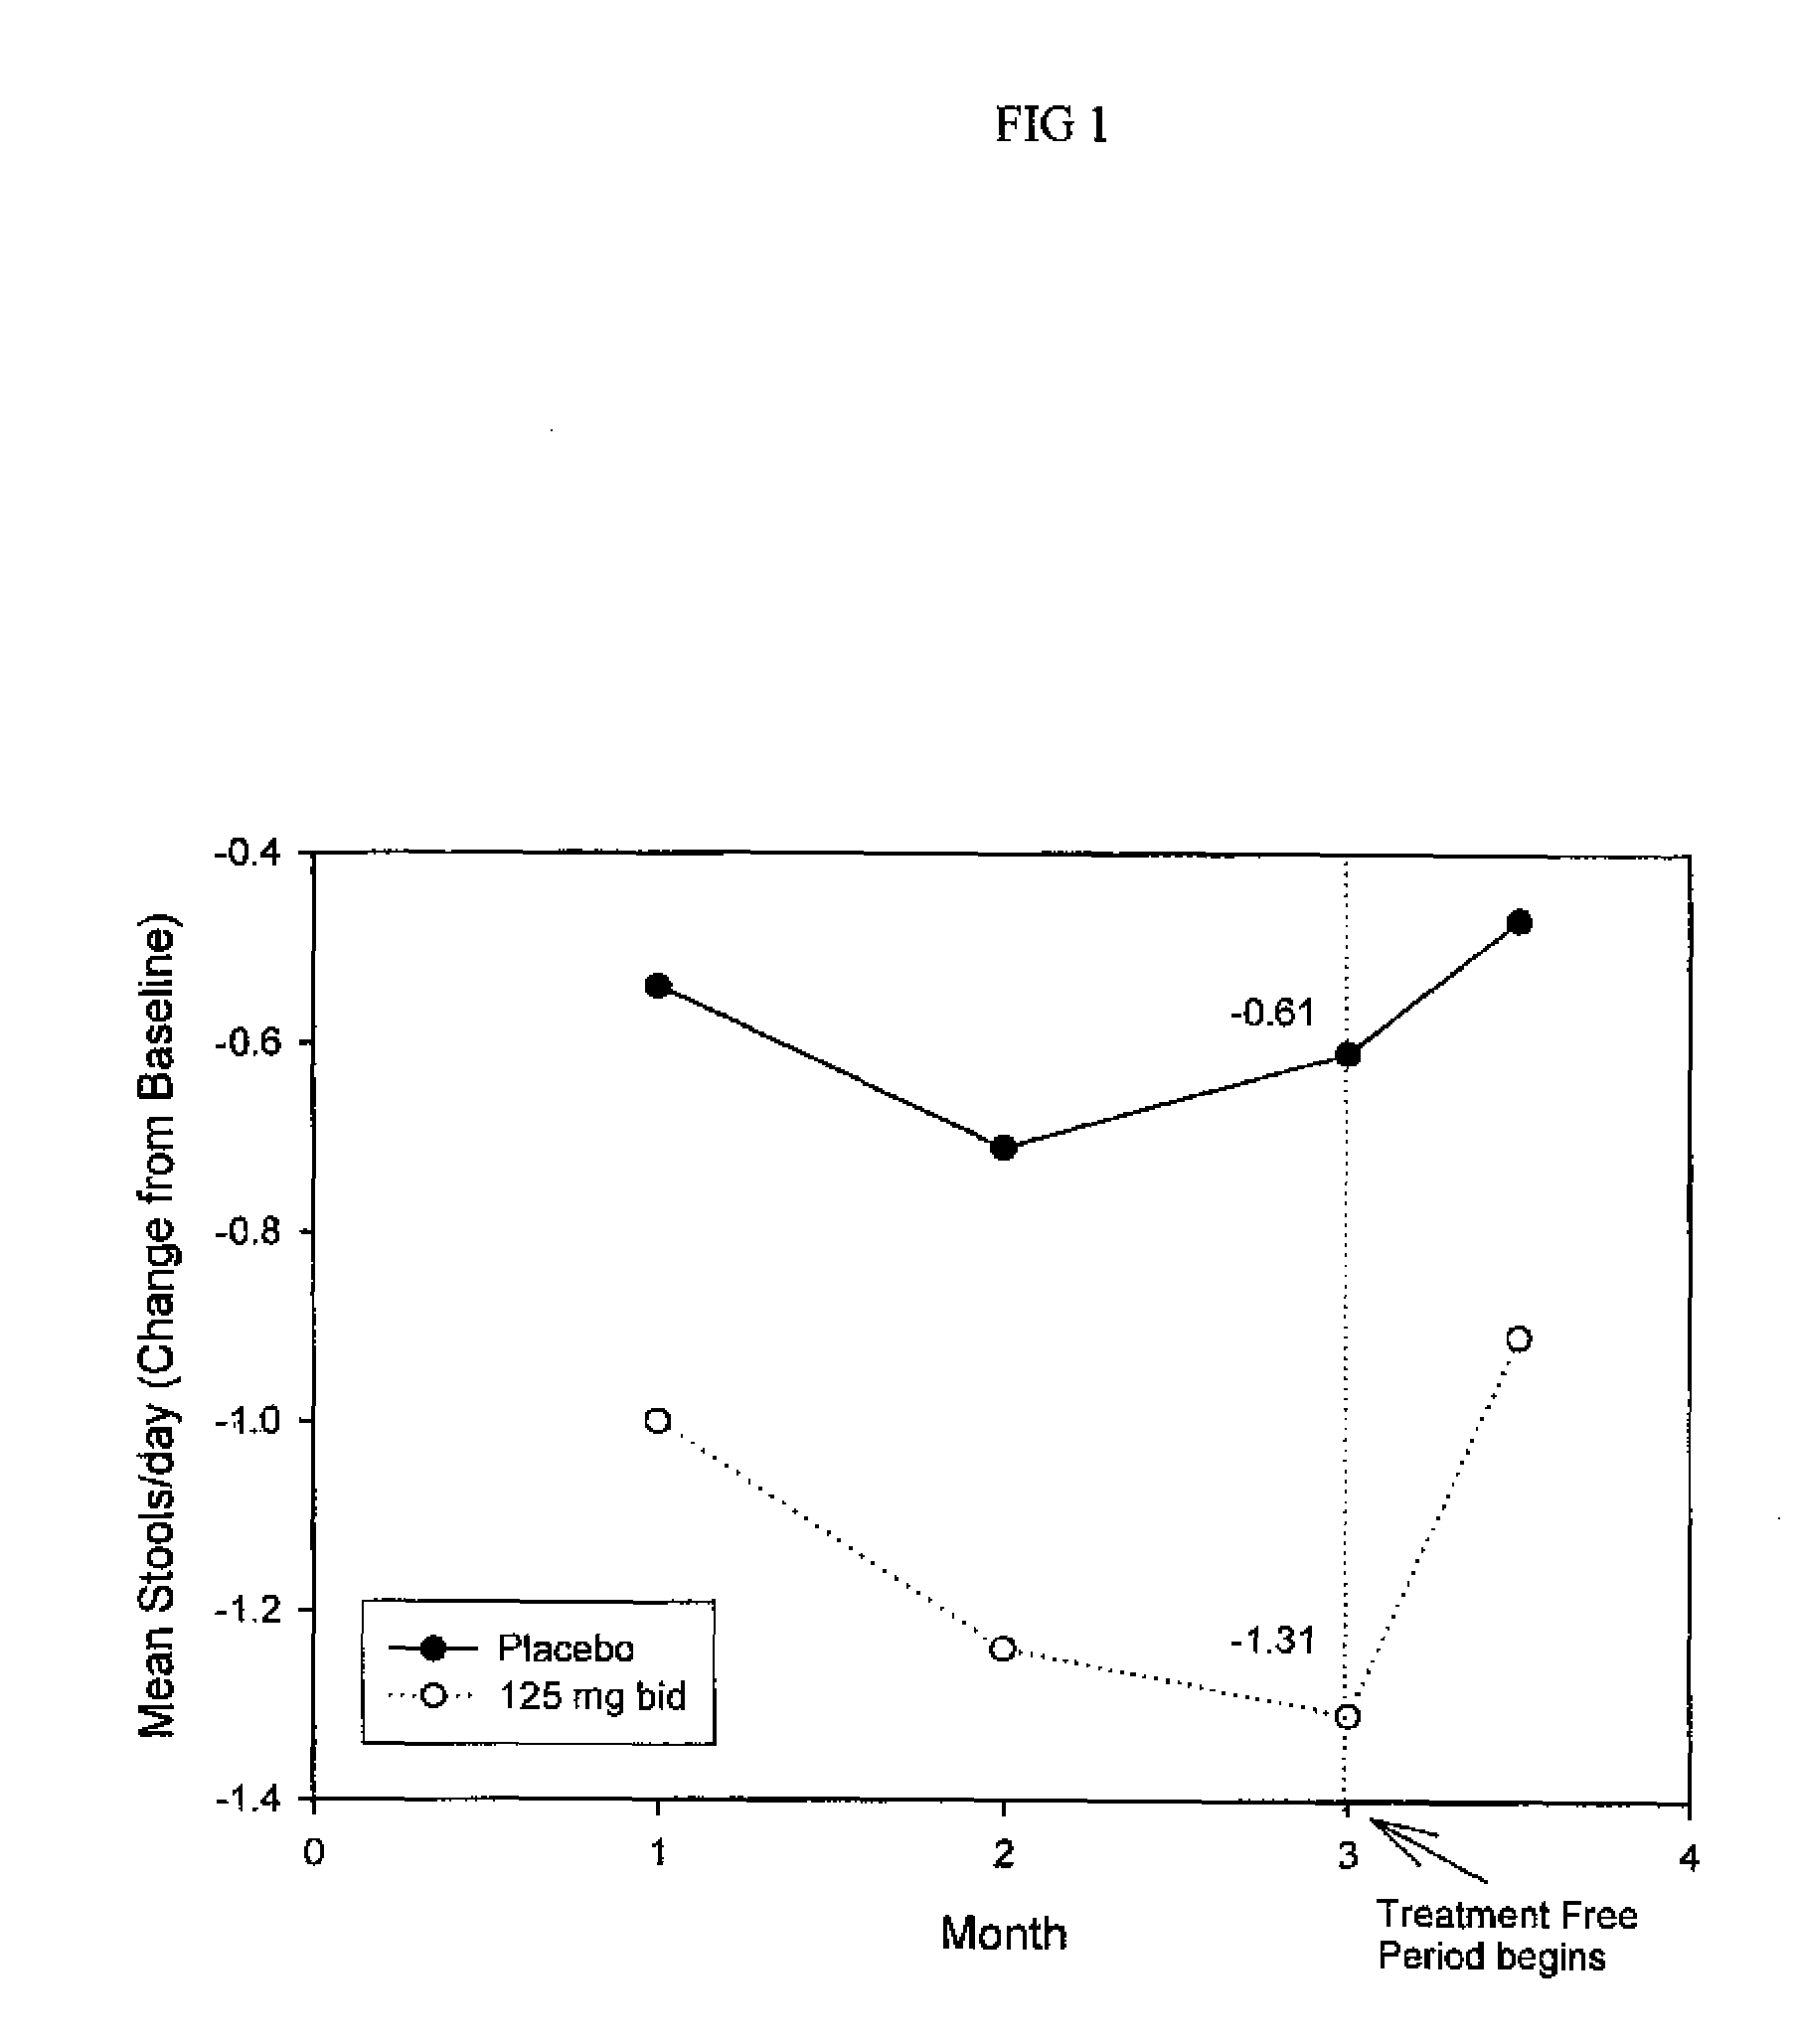 Method for treatment of constipation-predominant irritable bowel syndrome